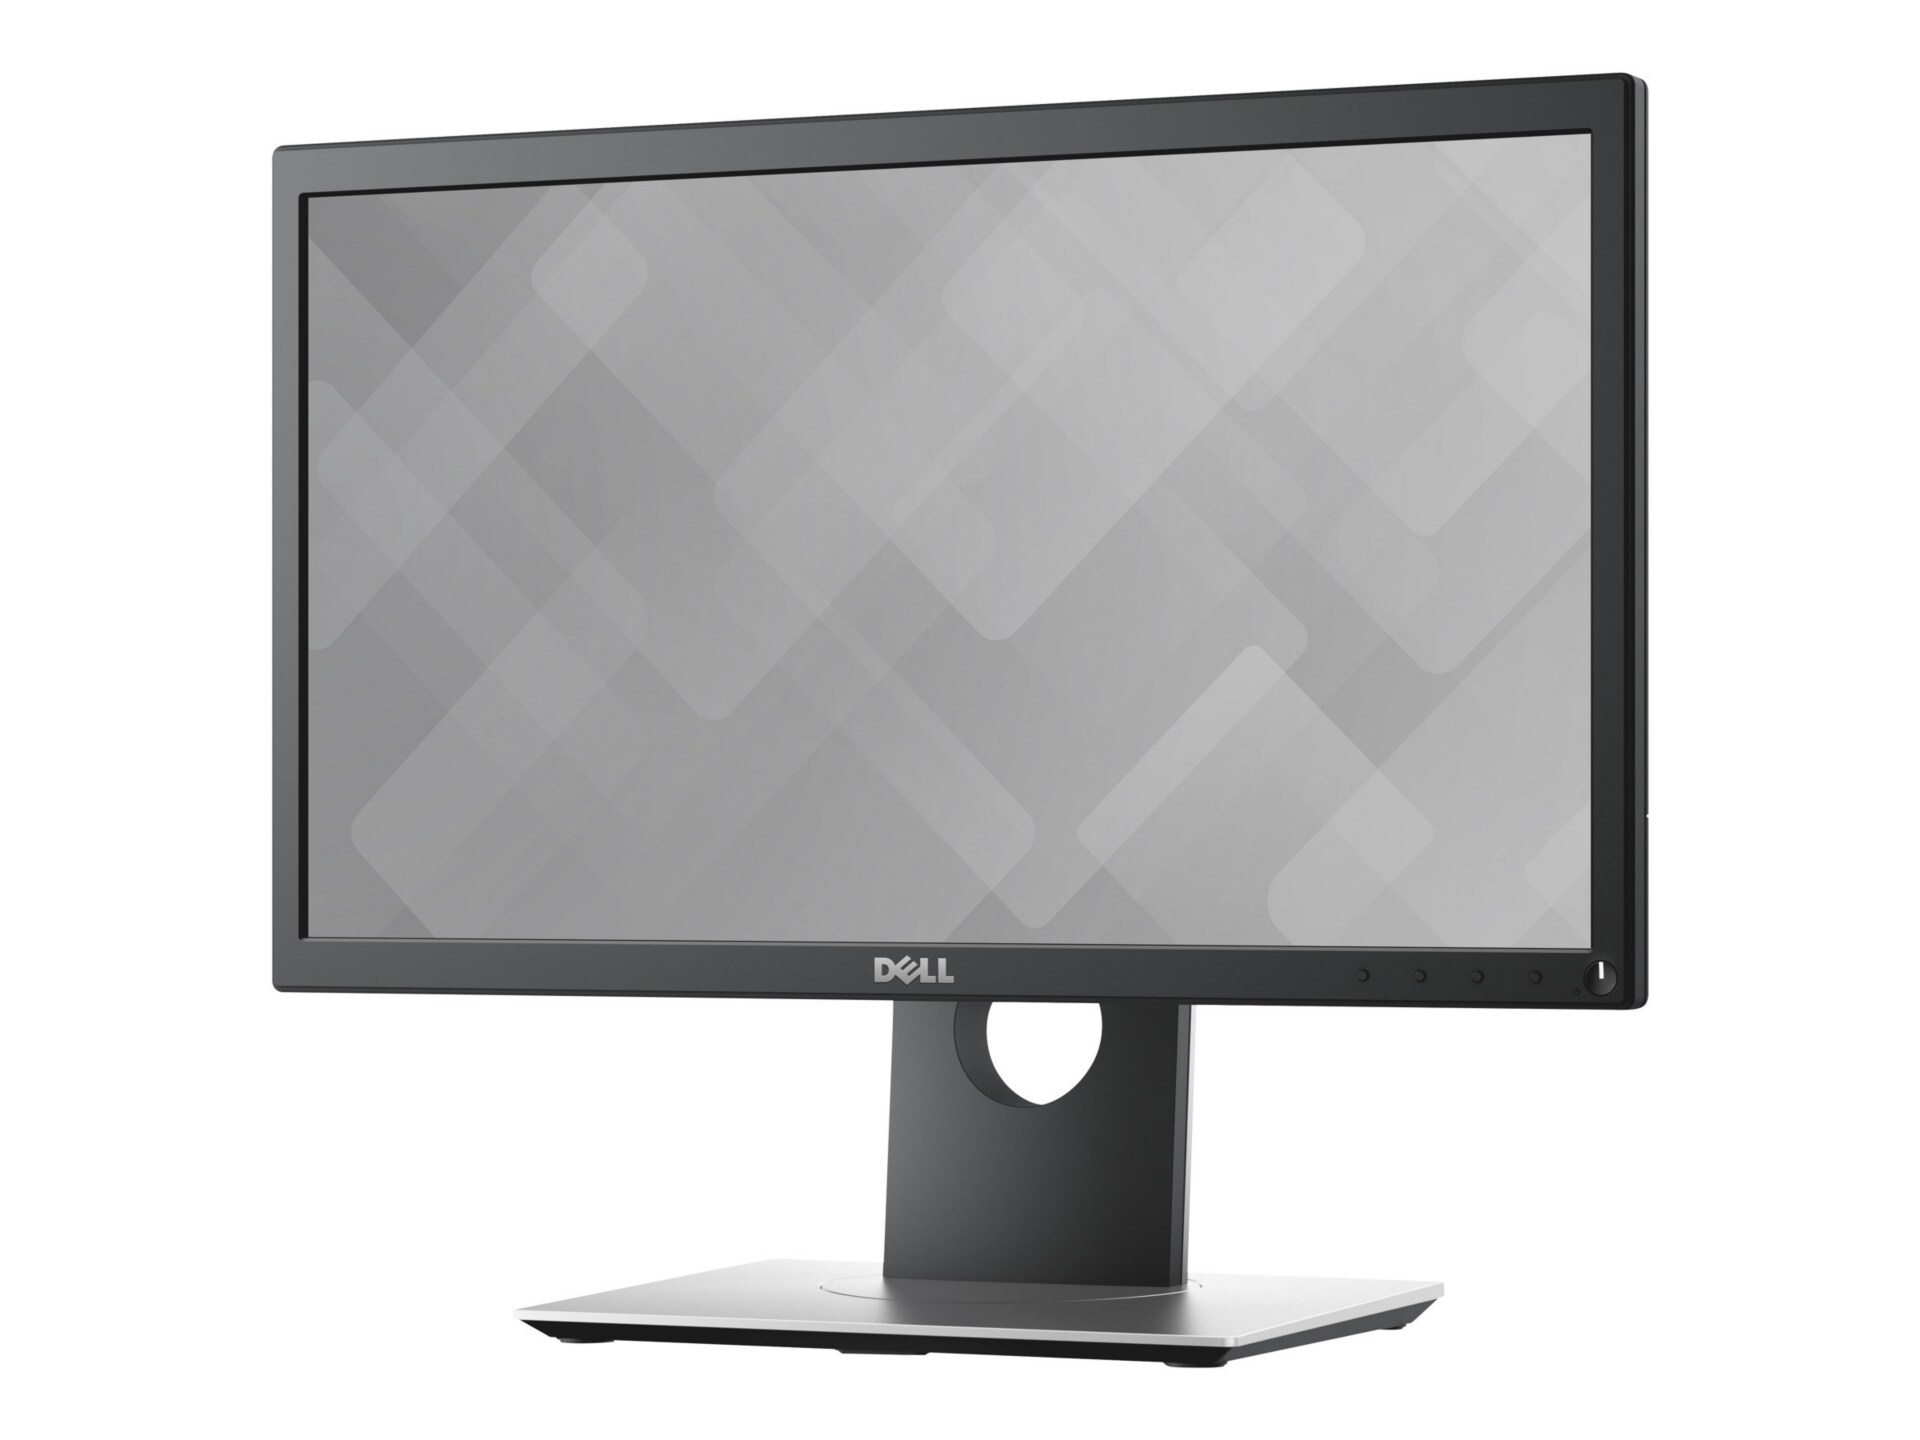 DELL 20IN MONITOR - P2018H (BSTK)